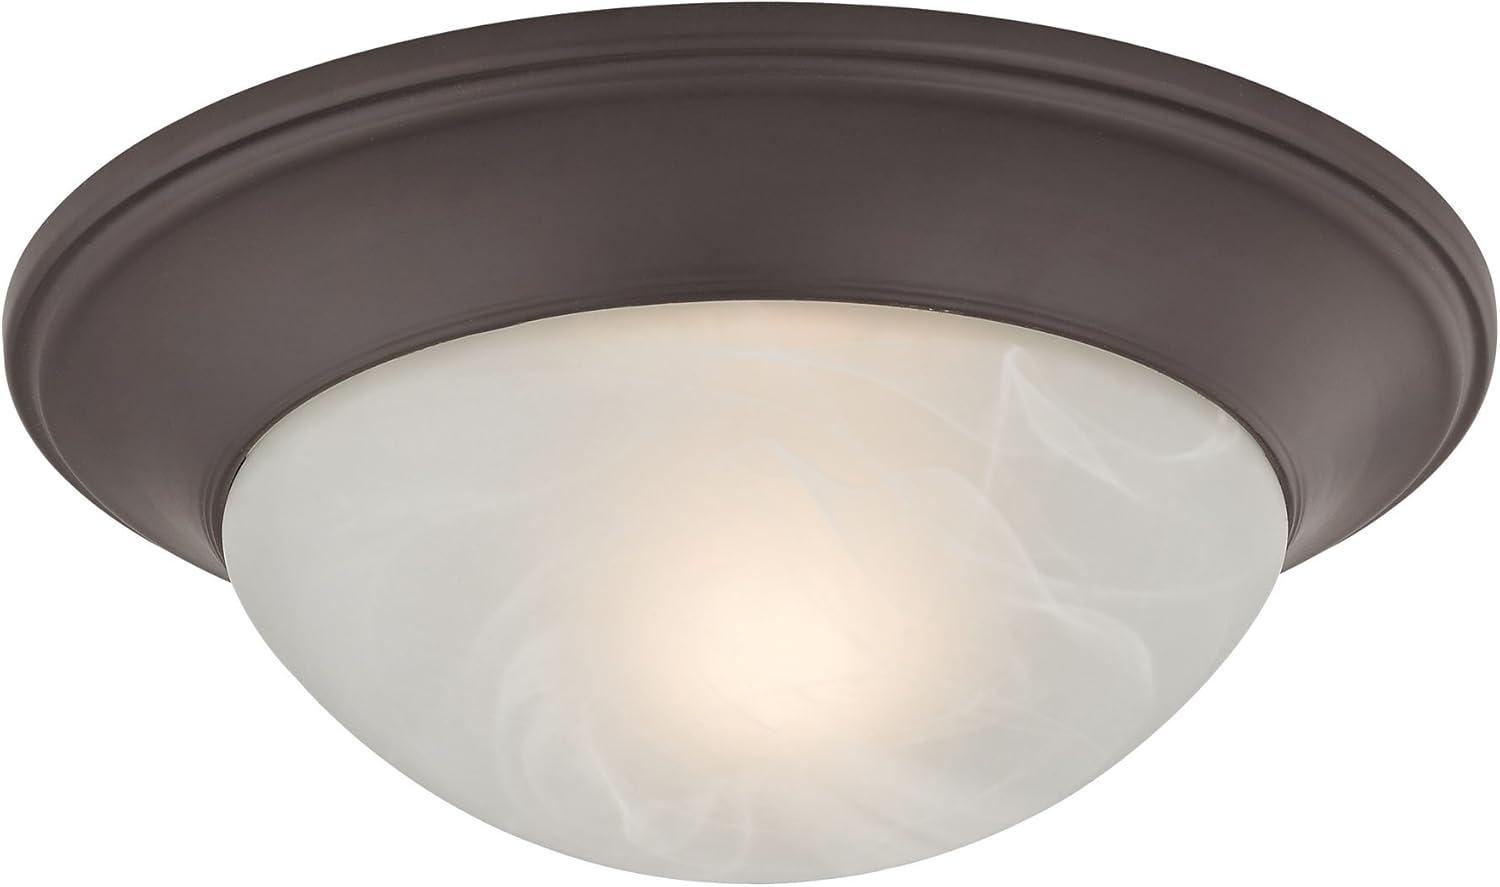 Contemporary 12" Oil Rubbed Bronze Flush Mount with Alabaster Glass Bowl